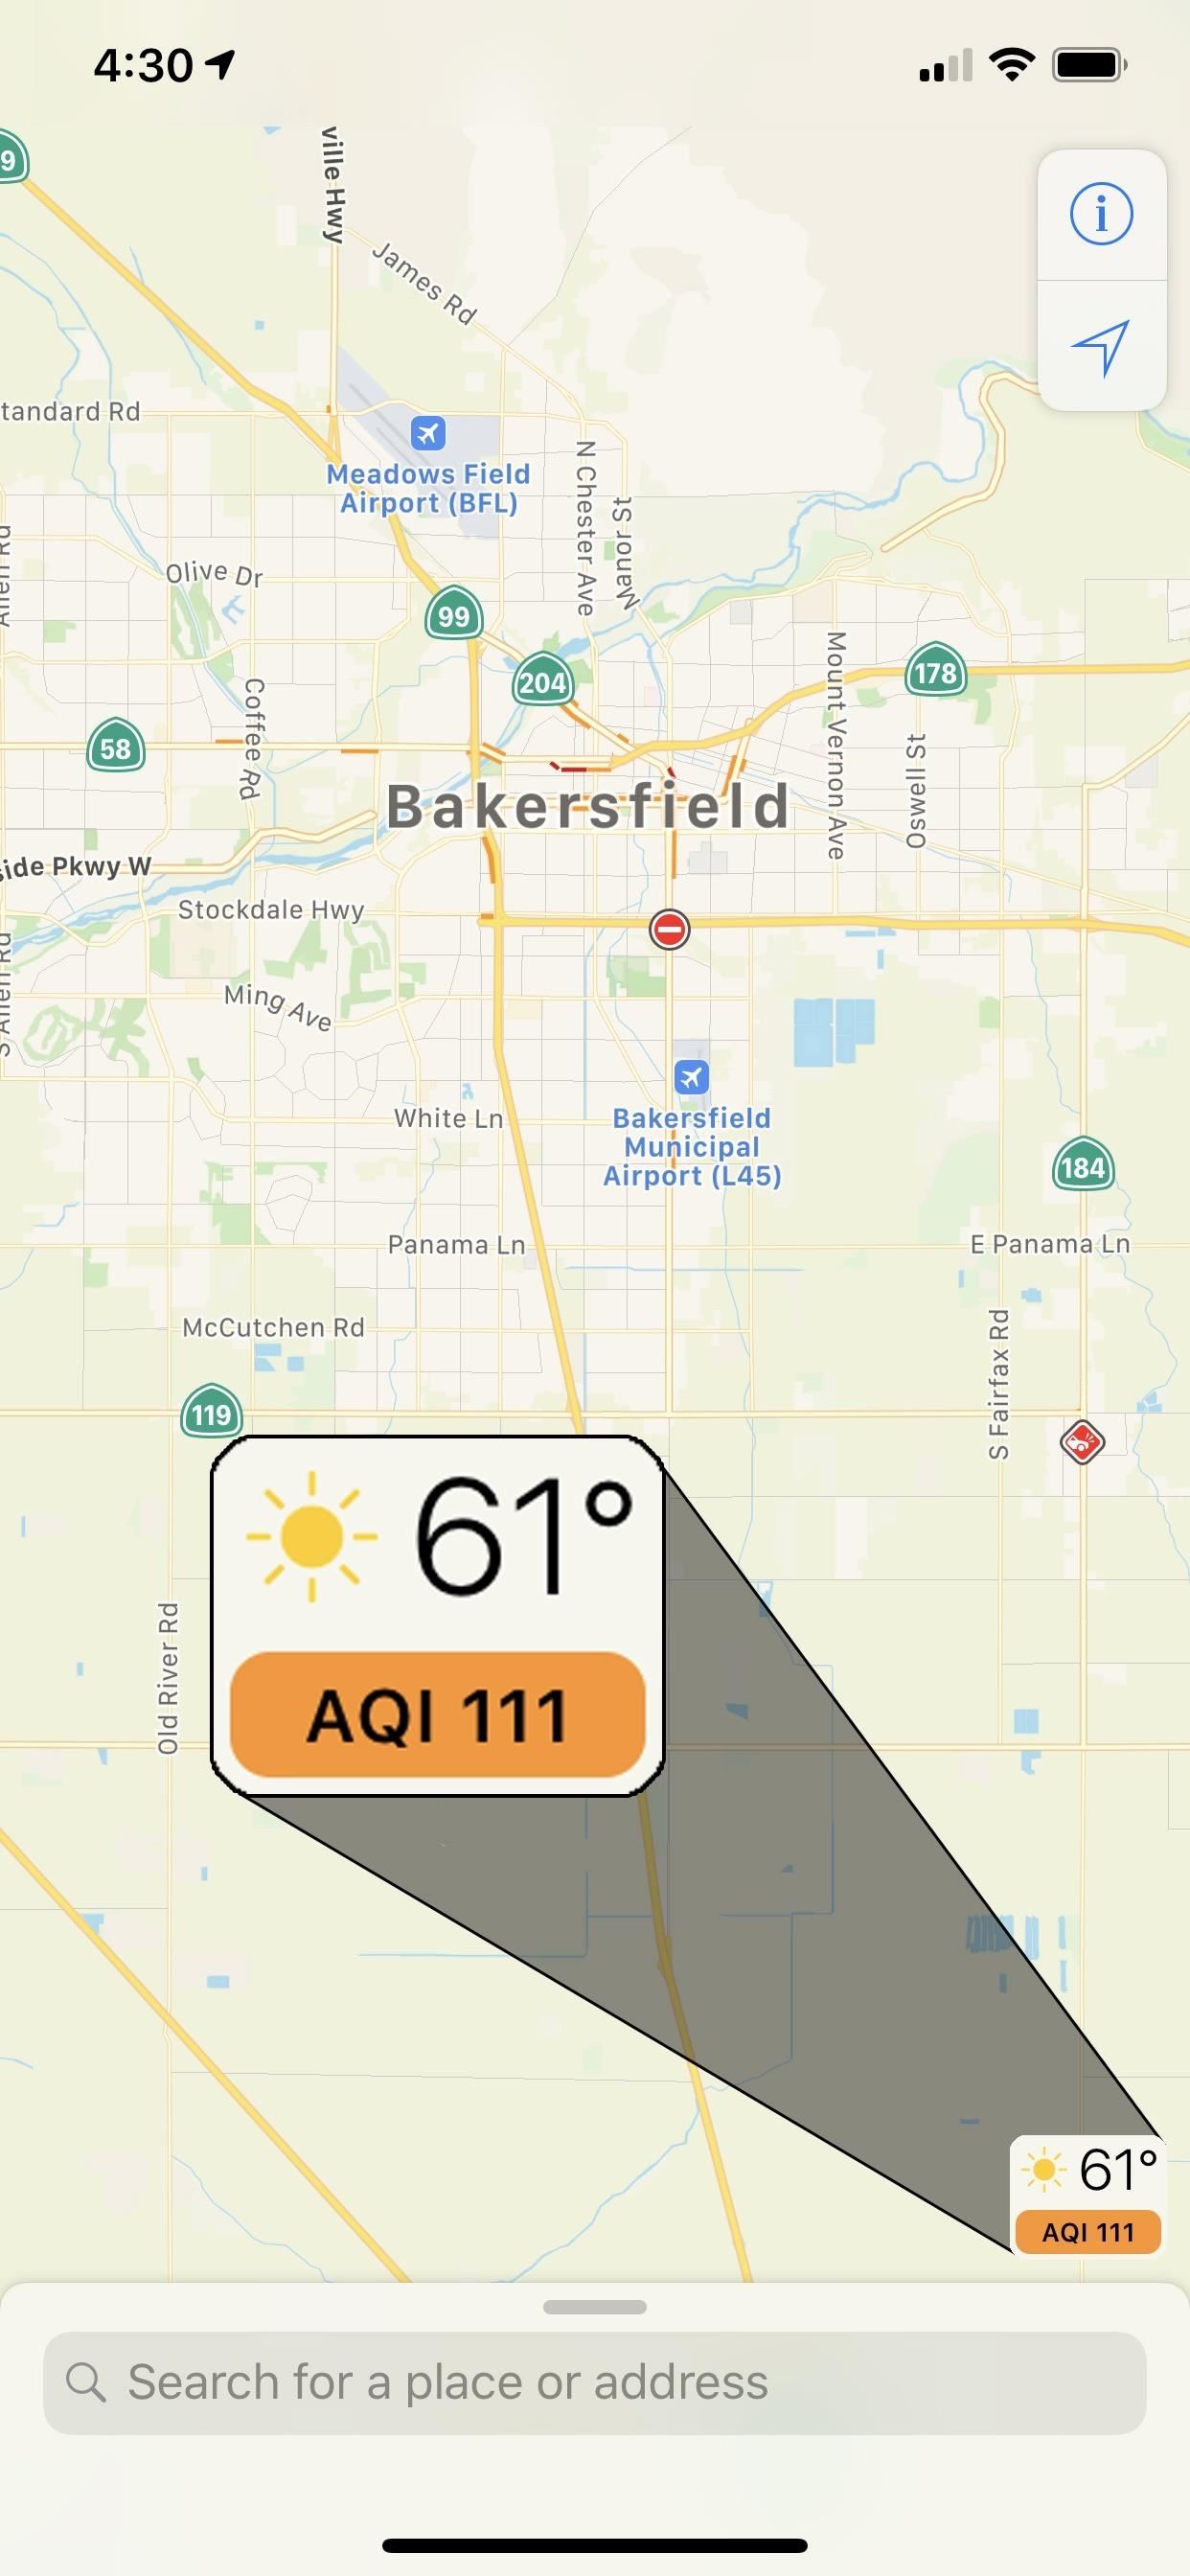 View Air Quality in Apple Maps to See How Polluted Cities & Destinations Are